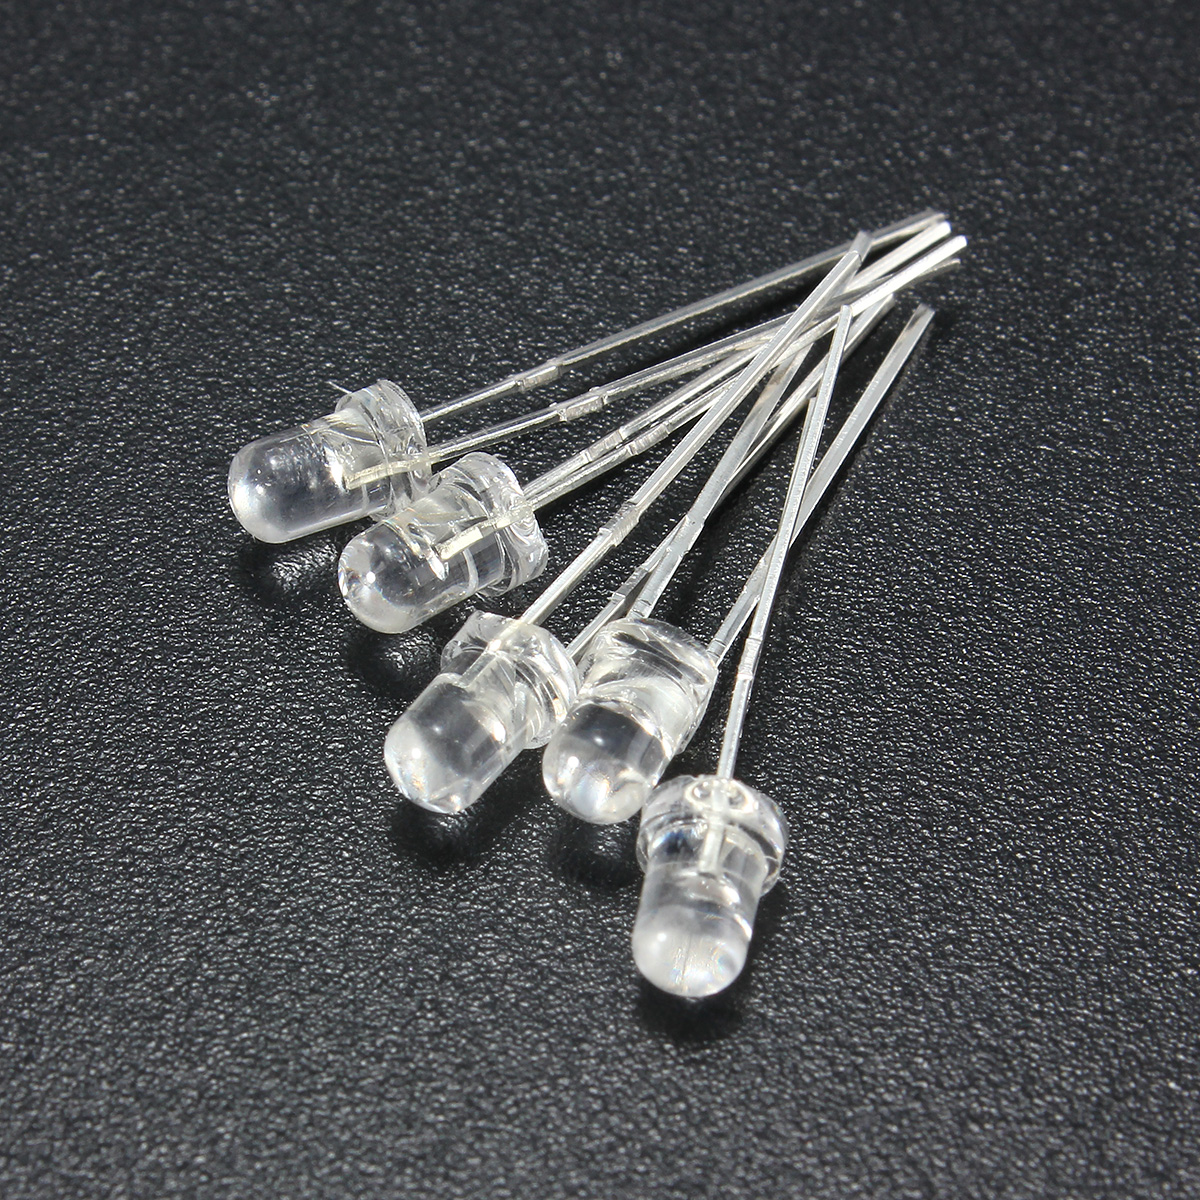 1000pcs-3MM-Round-Red-Green-Blue-Yellow-White-Water-Clear-LED-Diodes-Light-Kit-1074371